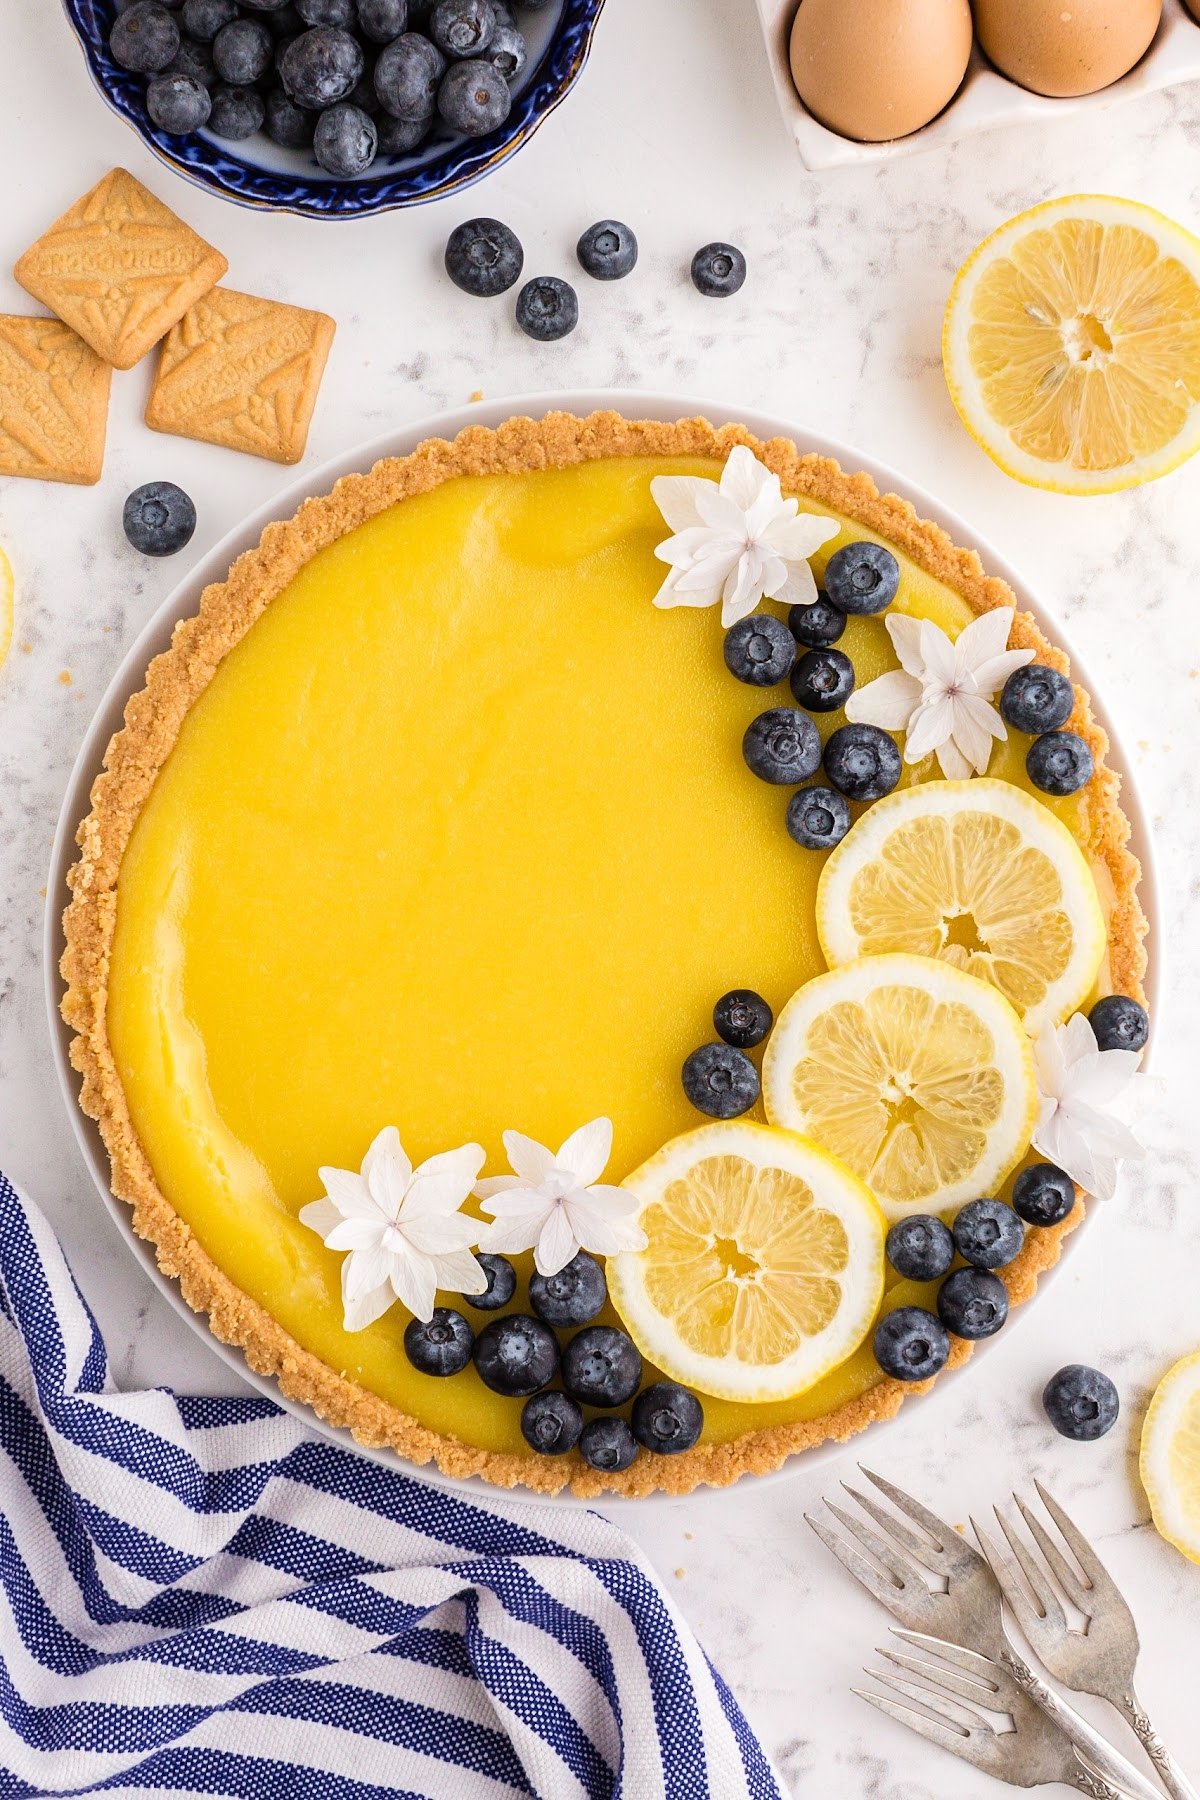 A garnished lemon curd tart with berries, editable flowers, and lemon slices.